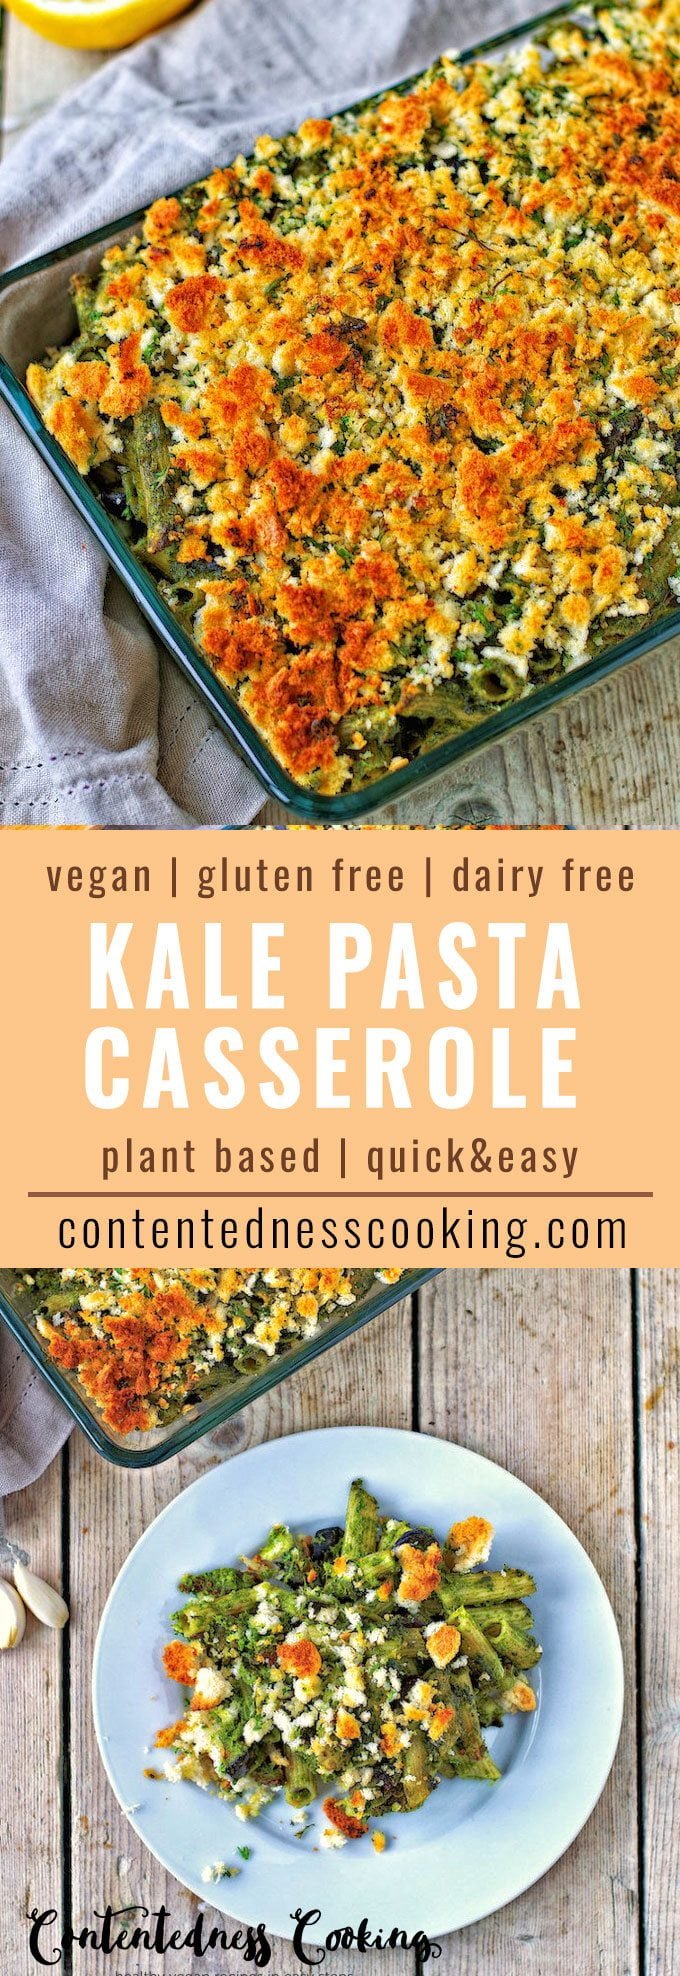 Collage of two pictures of the Kale Pasta Casserole with recipe title text.